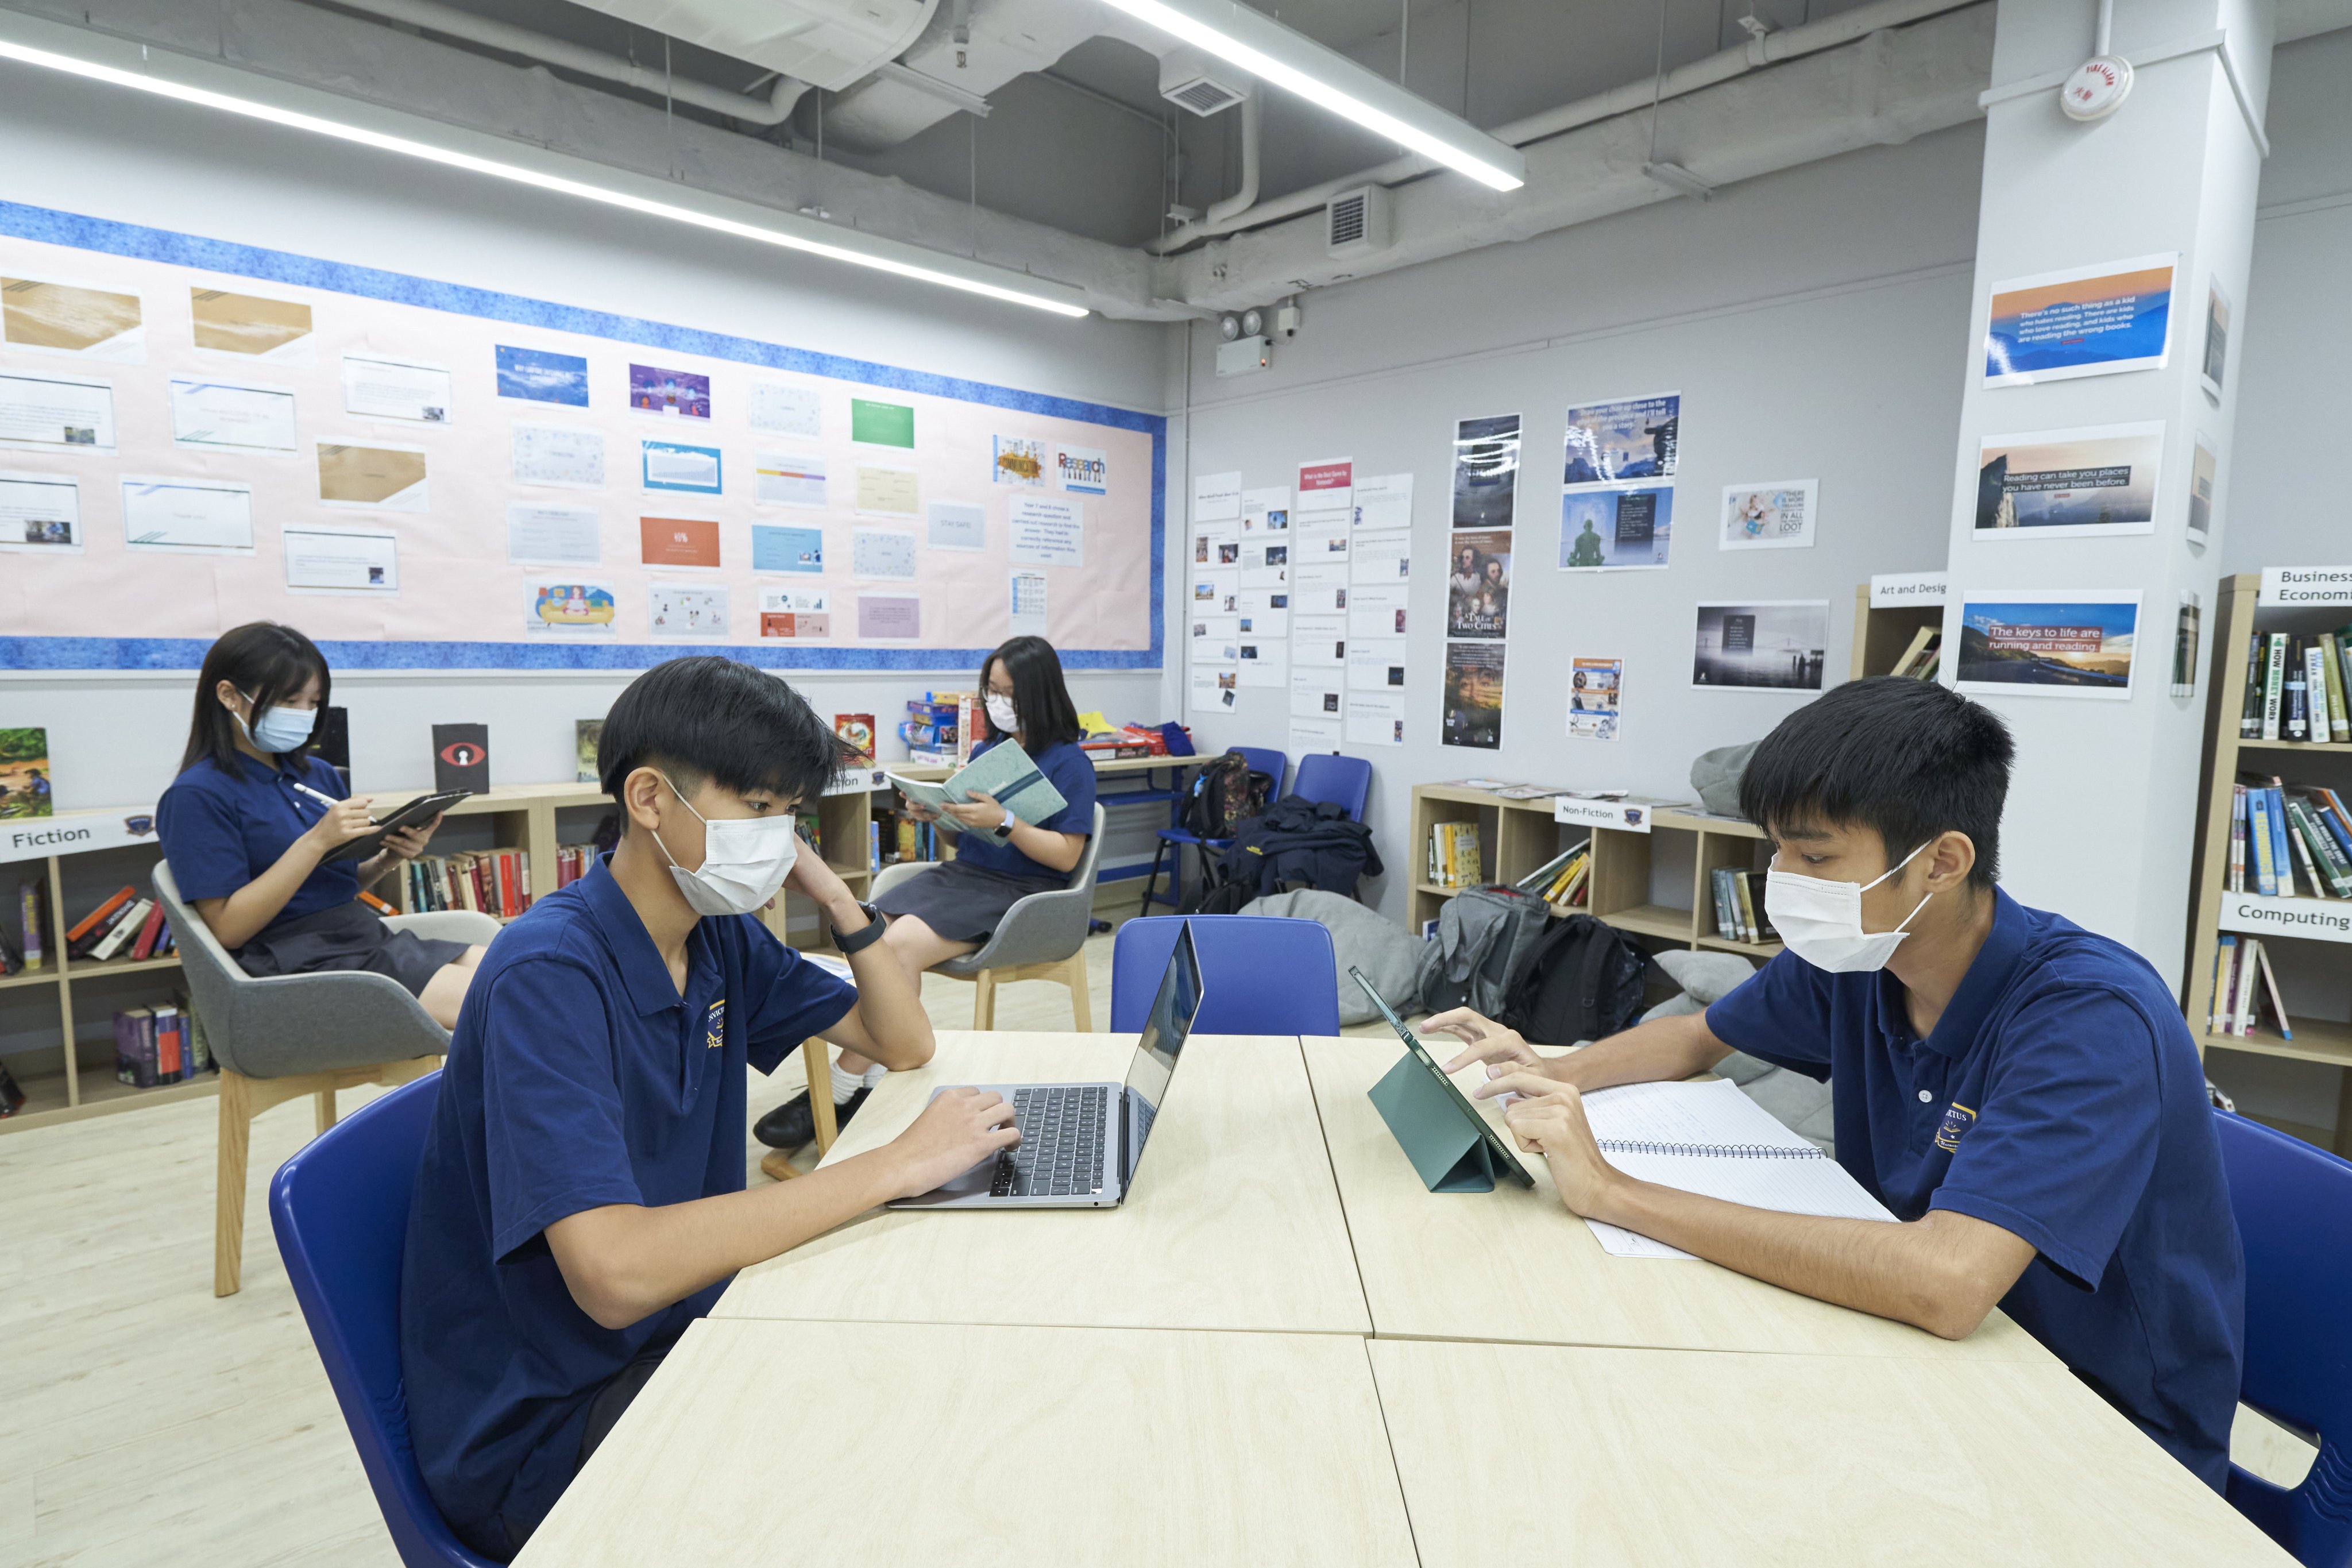 Invictus School Hong Kong offers curriculums that ensure a smooth transition for students who were already planning to continue their education in Britain, and vice versa.